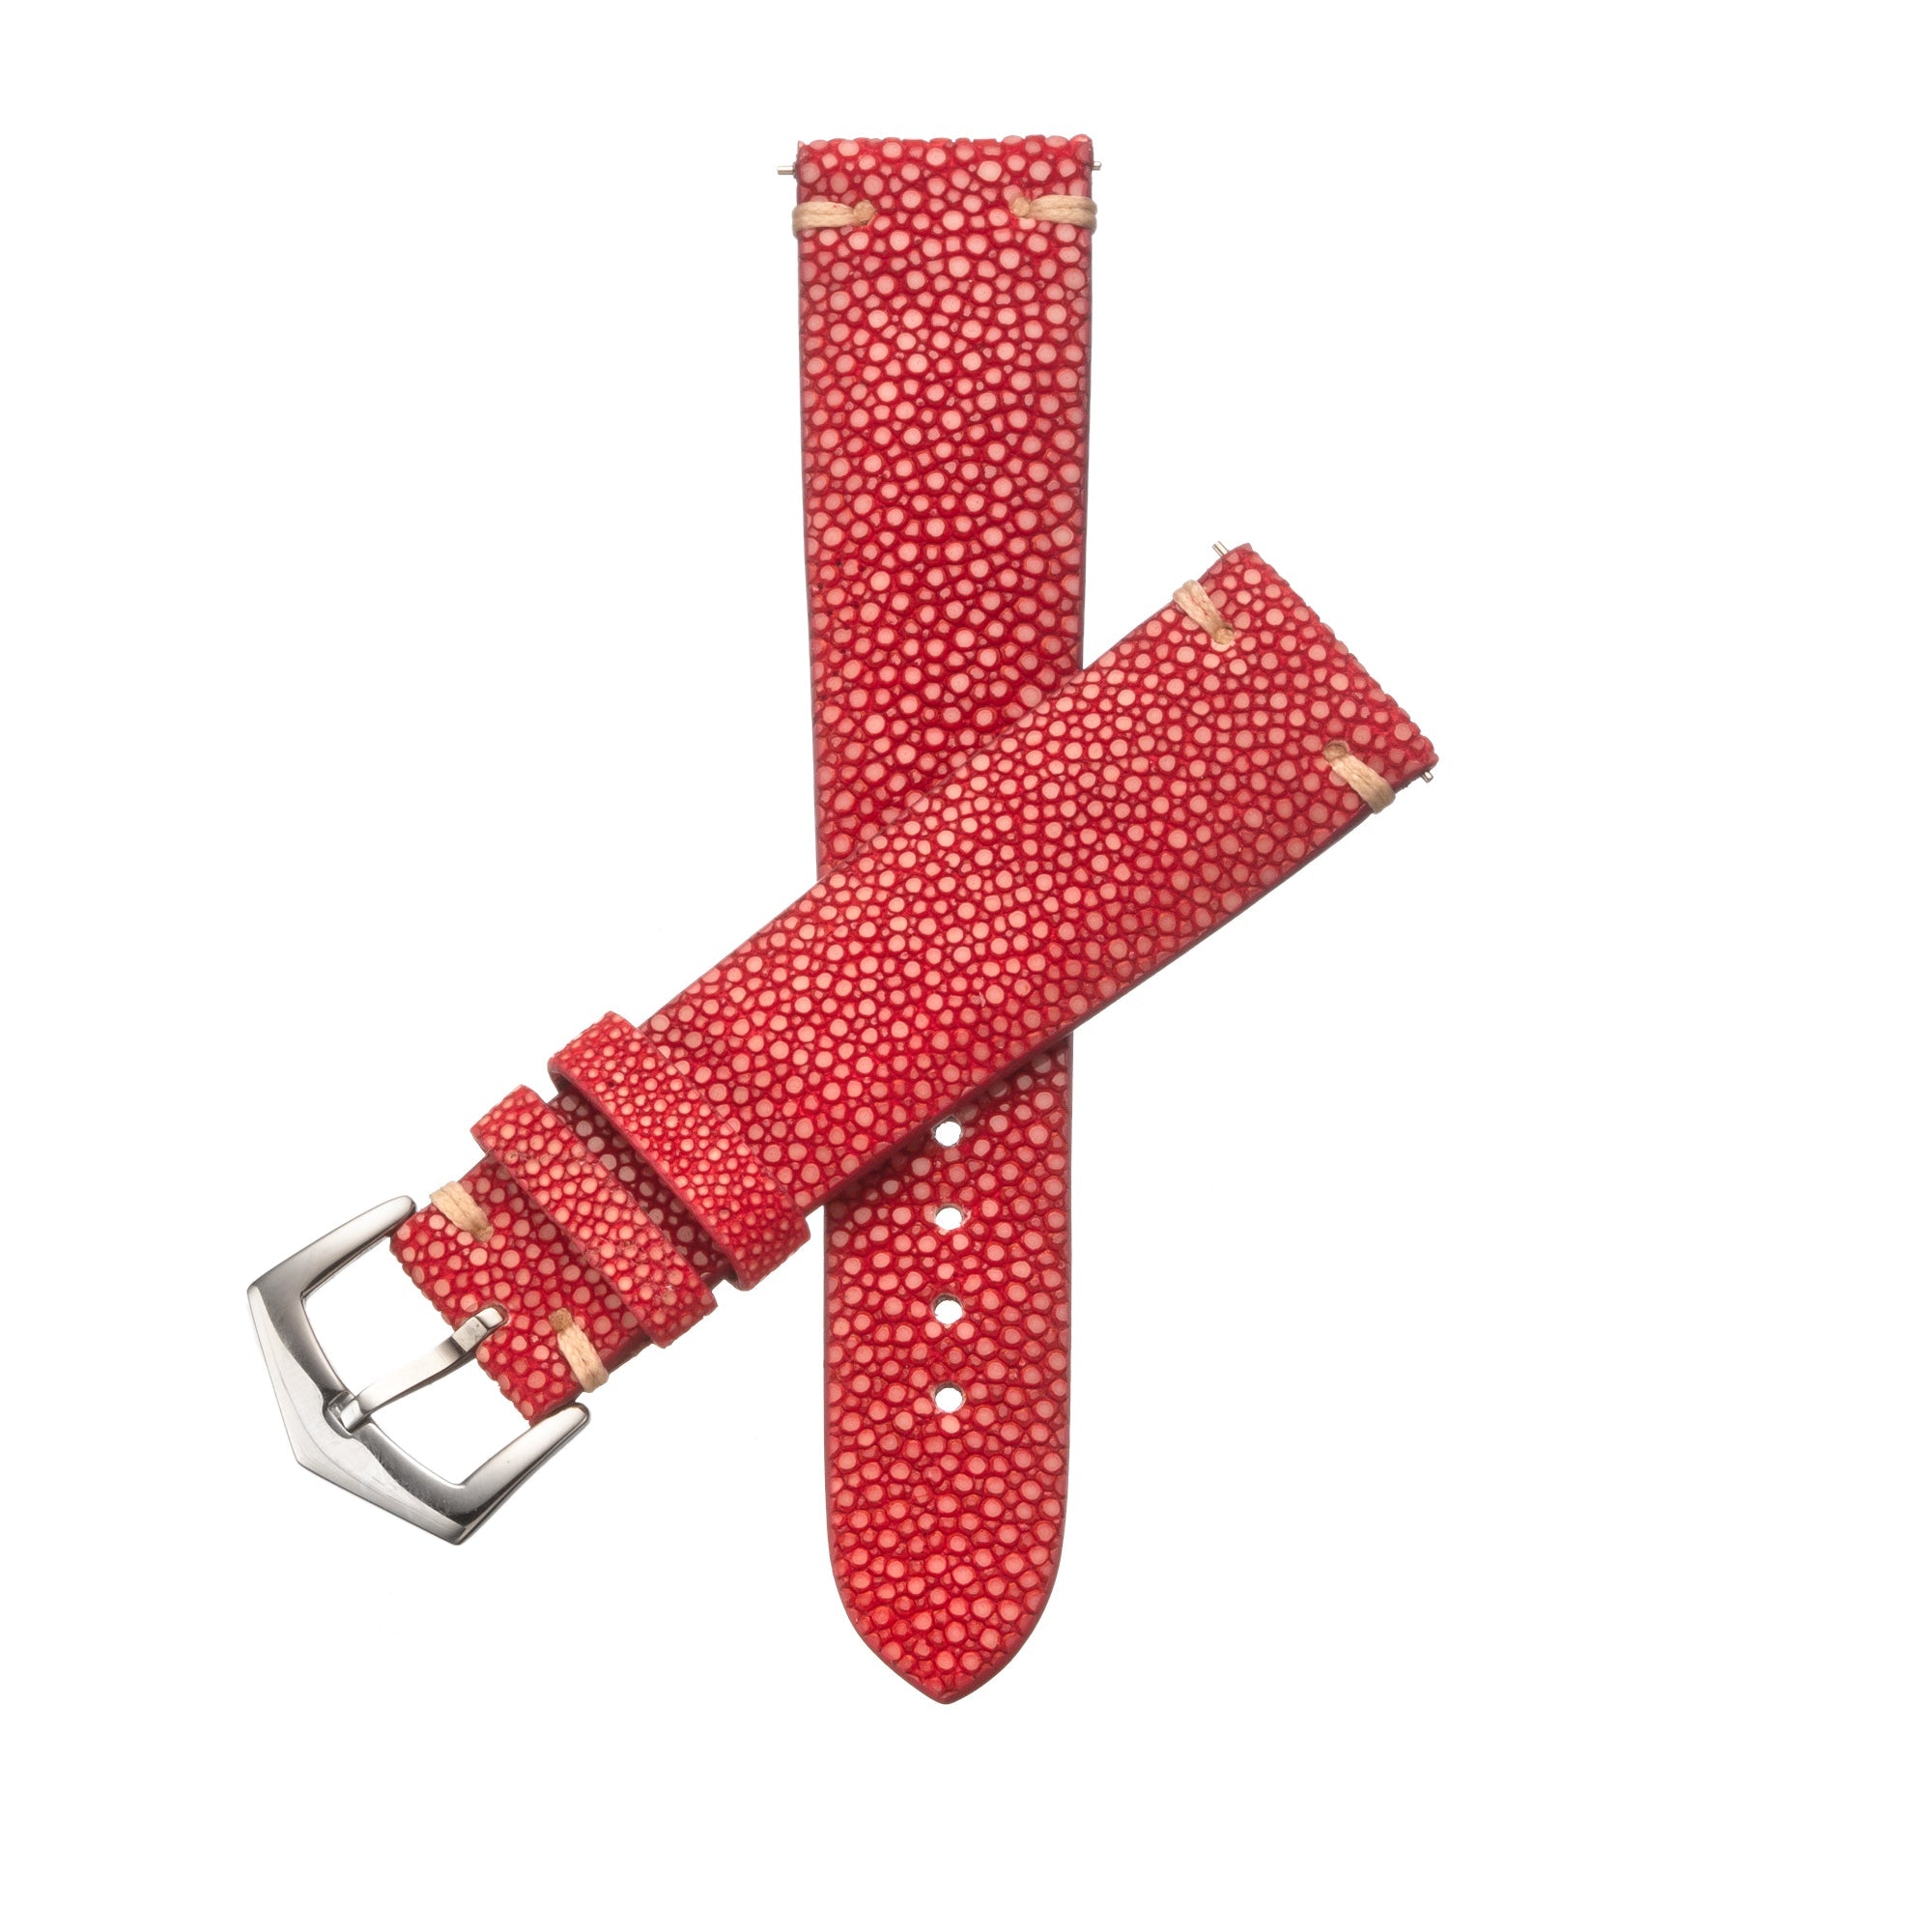 Sting Ray Watch Band Red - Milano Straps